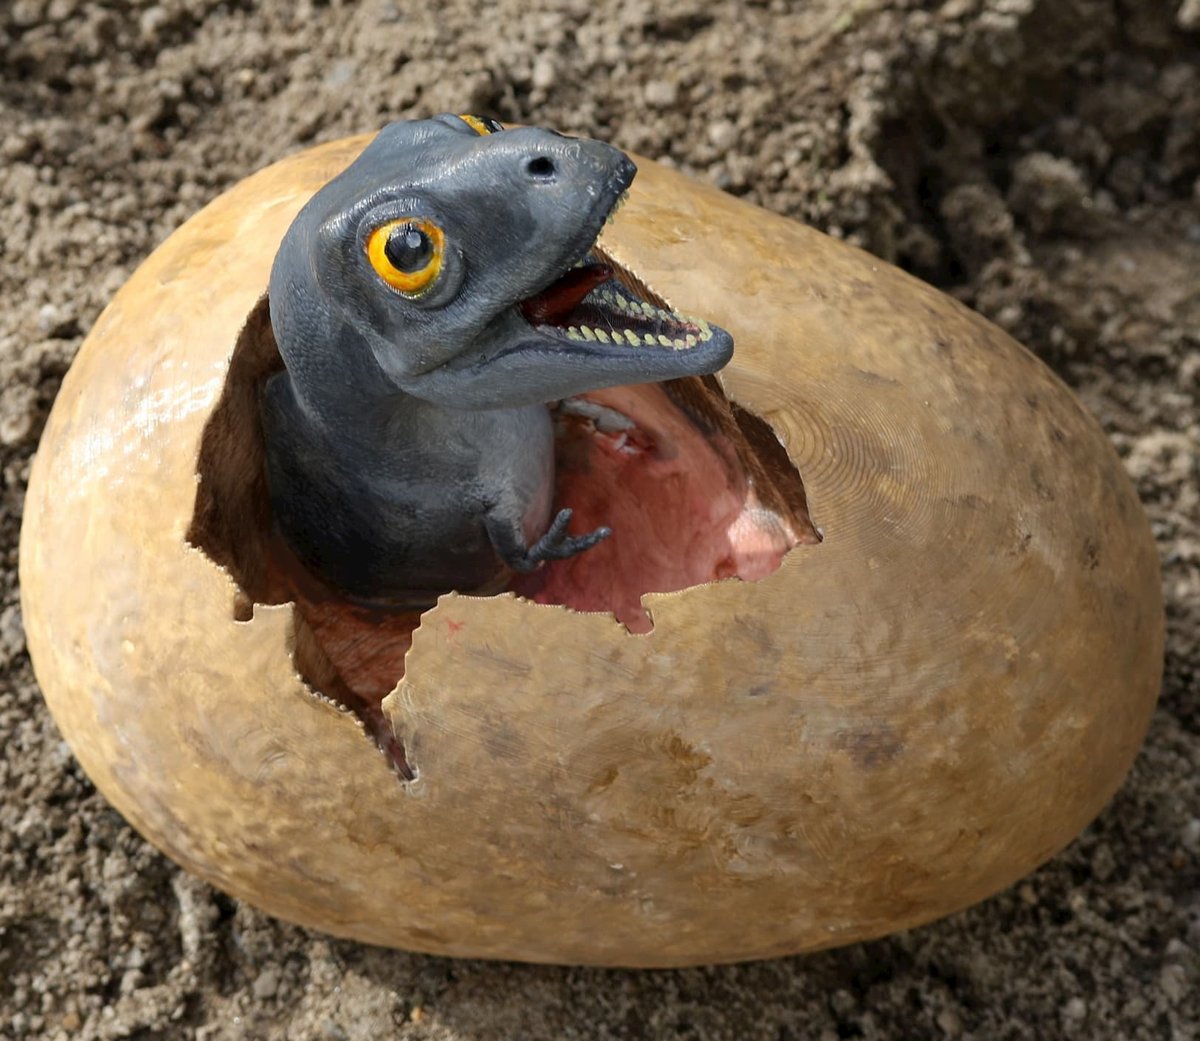 3D printed and painted T-Rex baby in egg.